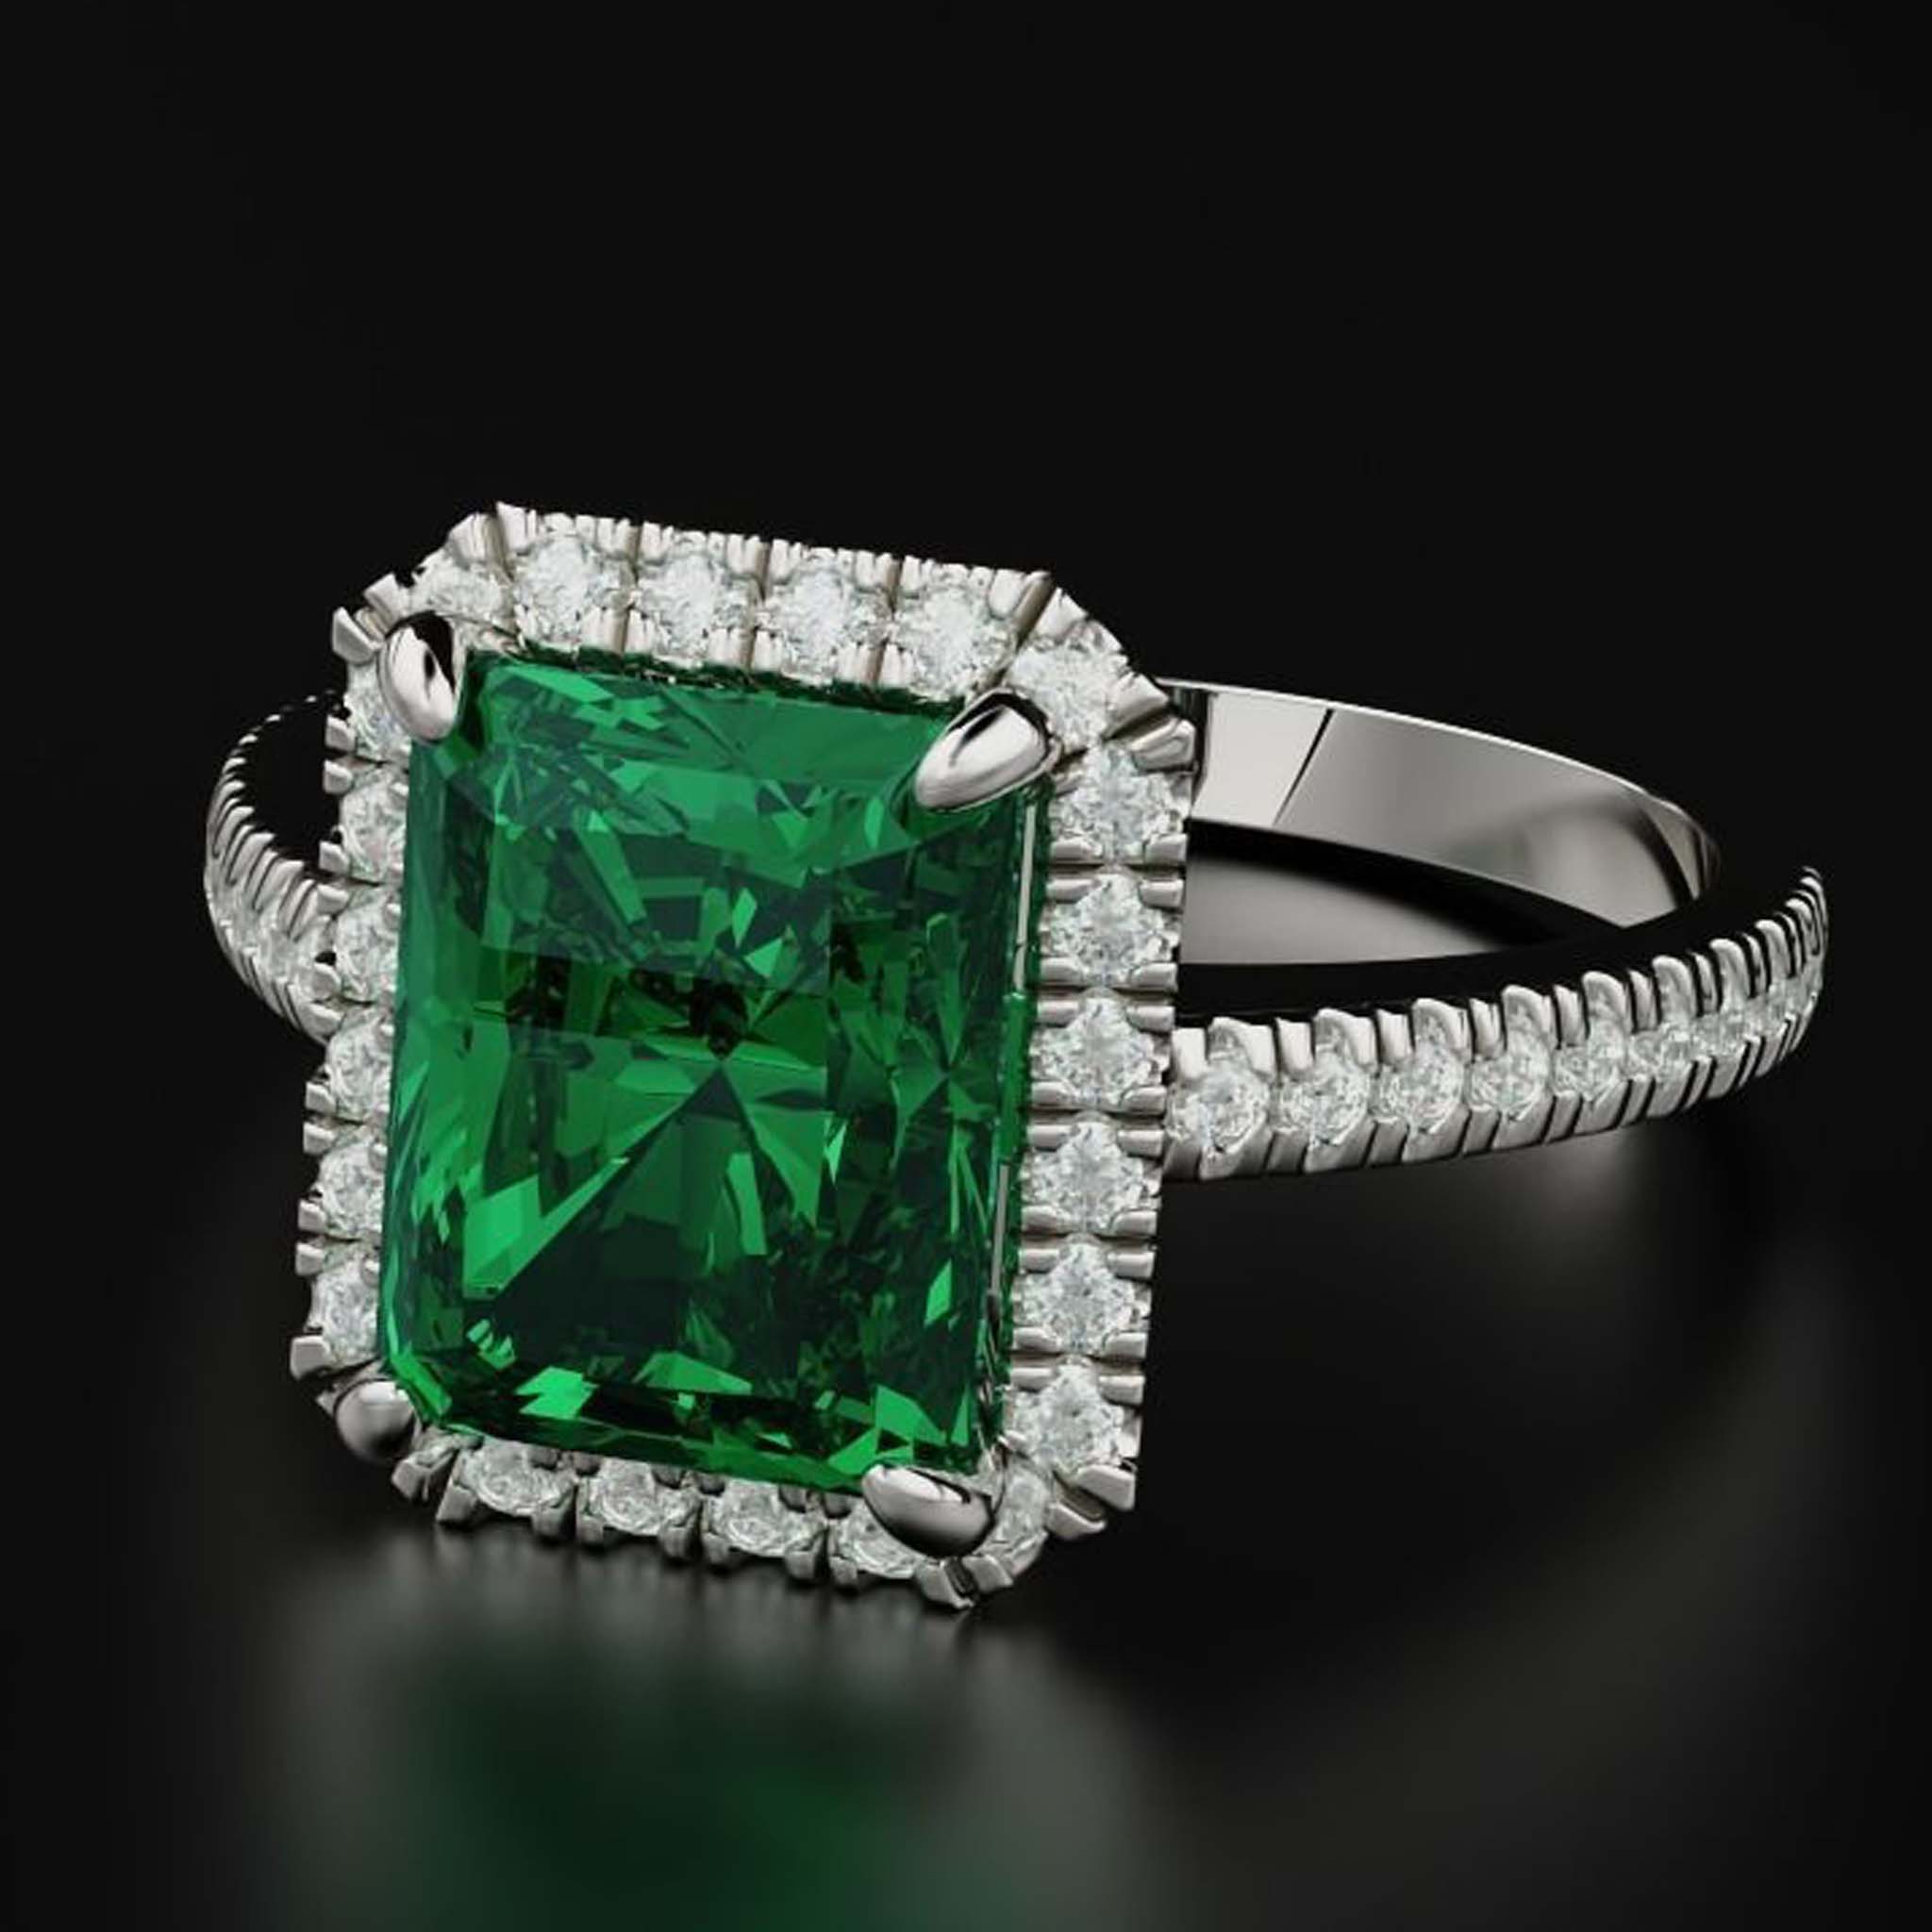 Emerald and sapphire engagement rings - view our stunning collection here